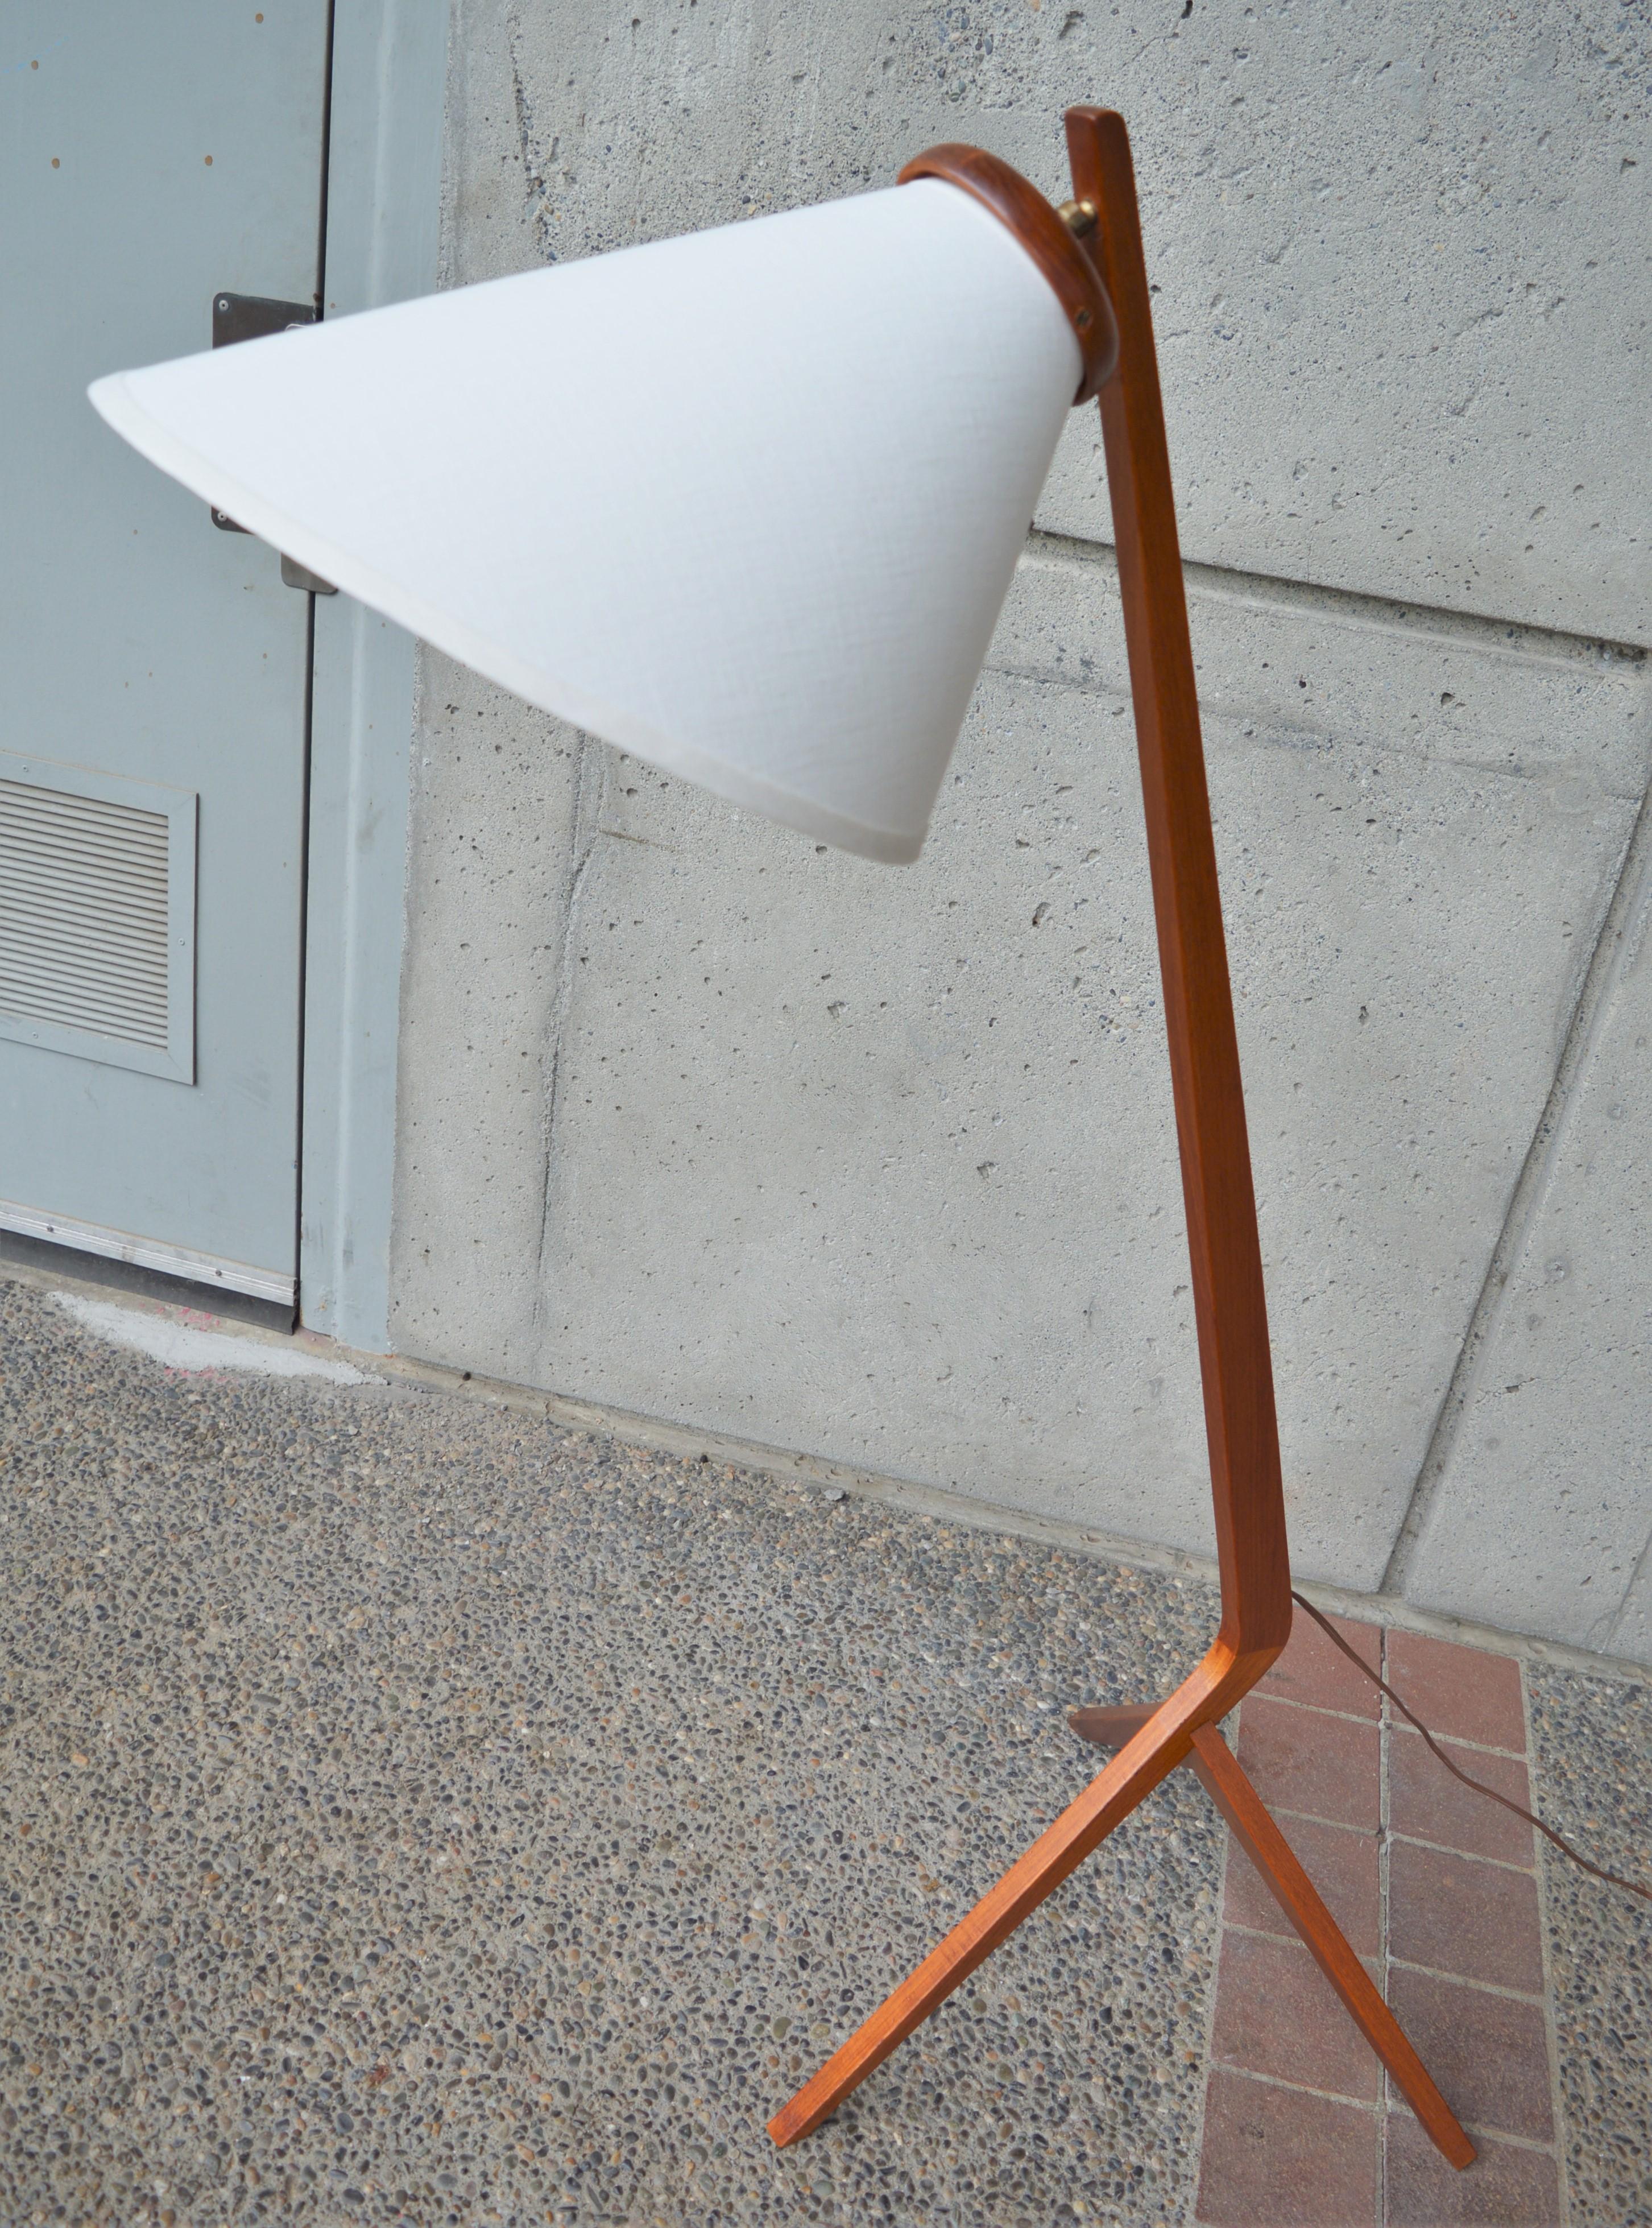 This iconic Danish modern teak Boomerang tripod floor lamp has killer lines and is in excellent condition! Featuring a nice rich patina and brass articulating hardware that holds the lampshade where positioned. Sporting a brand-new custom linen